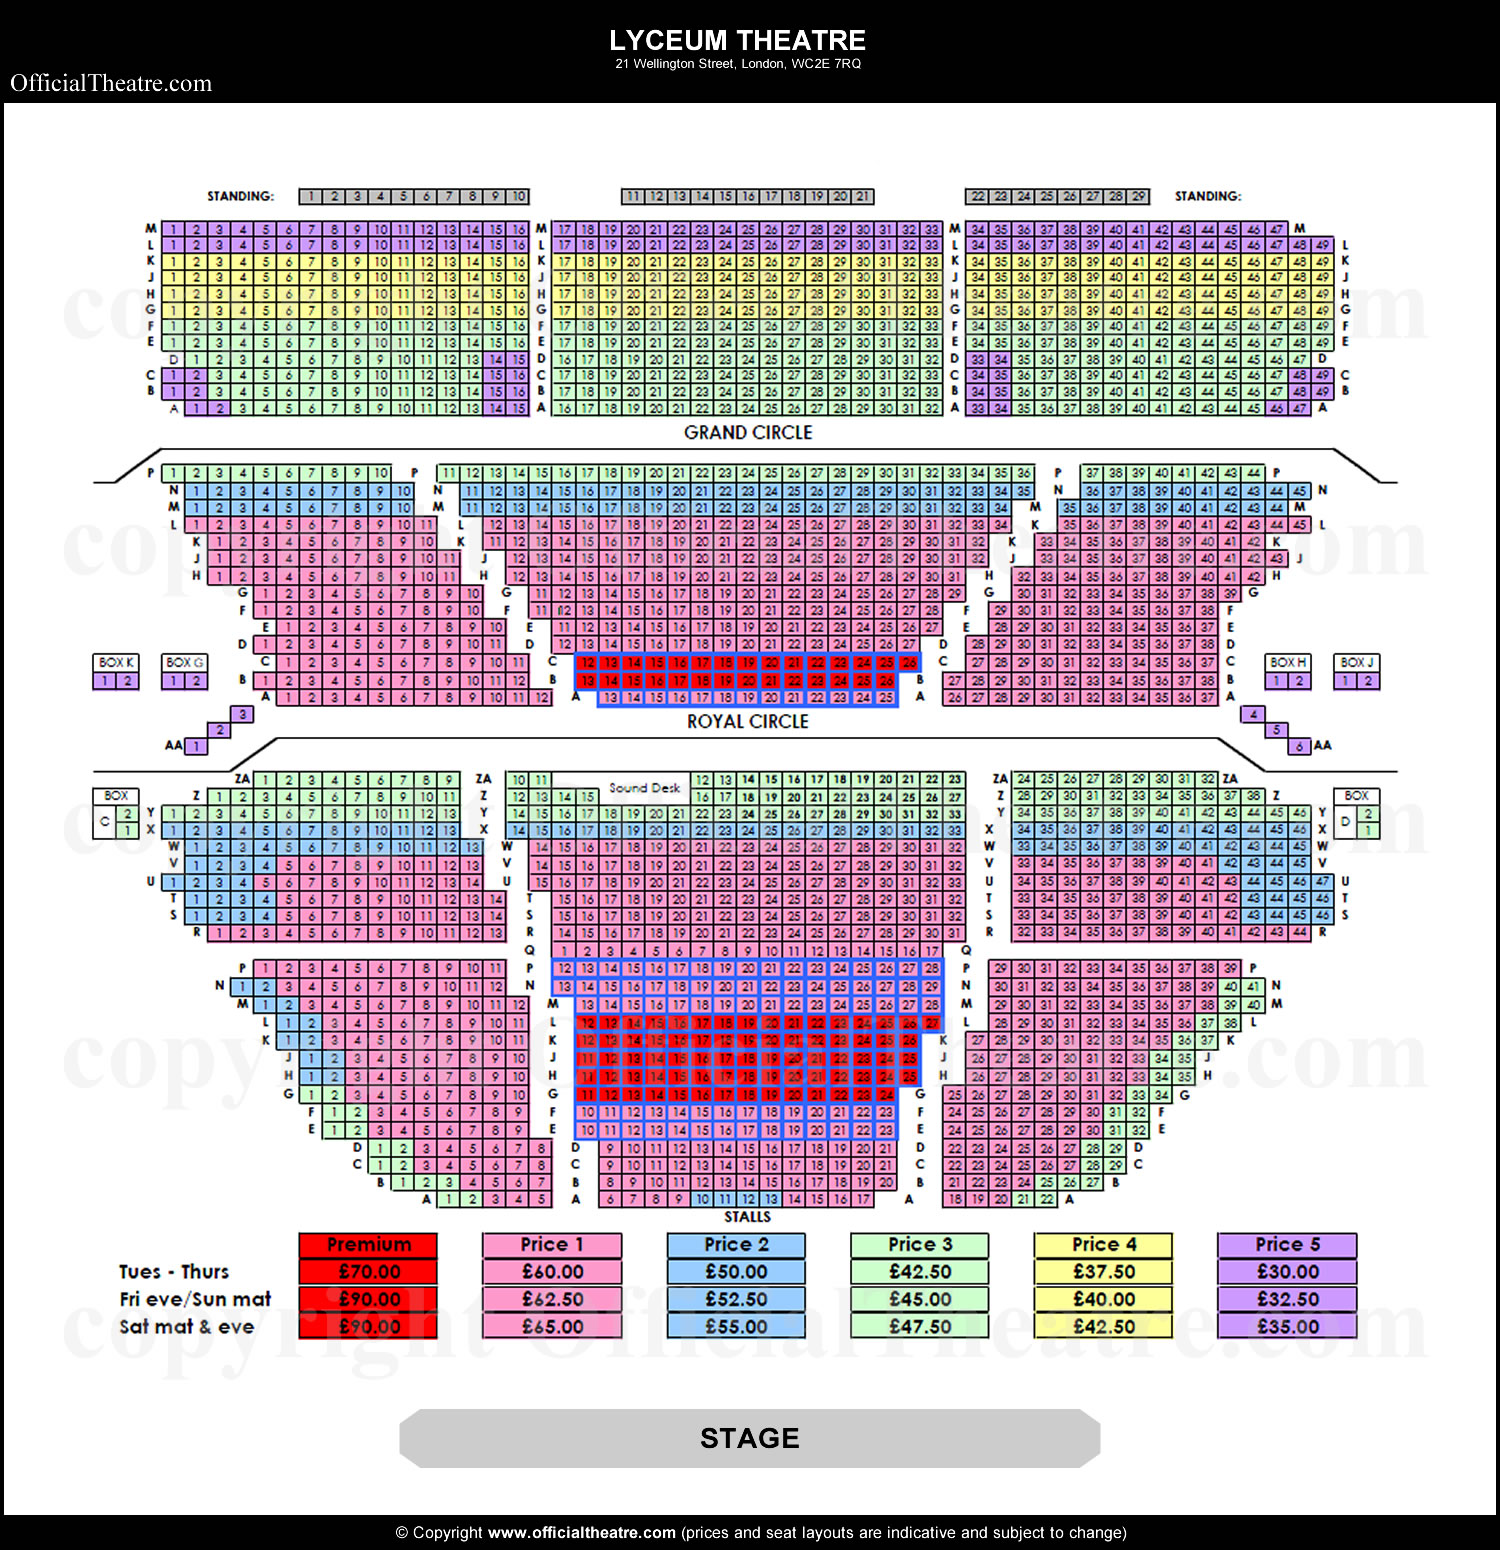 Lyceum Theatre London seat map and prices for The Lion King